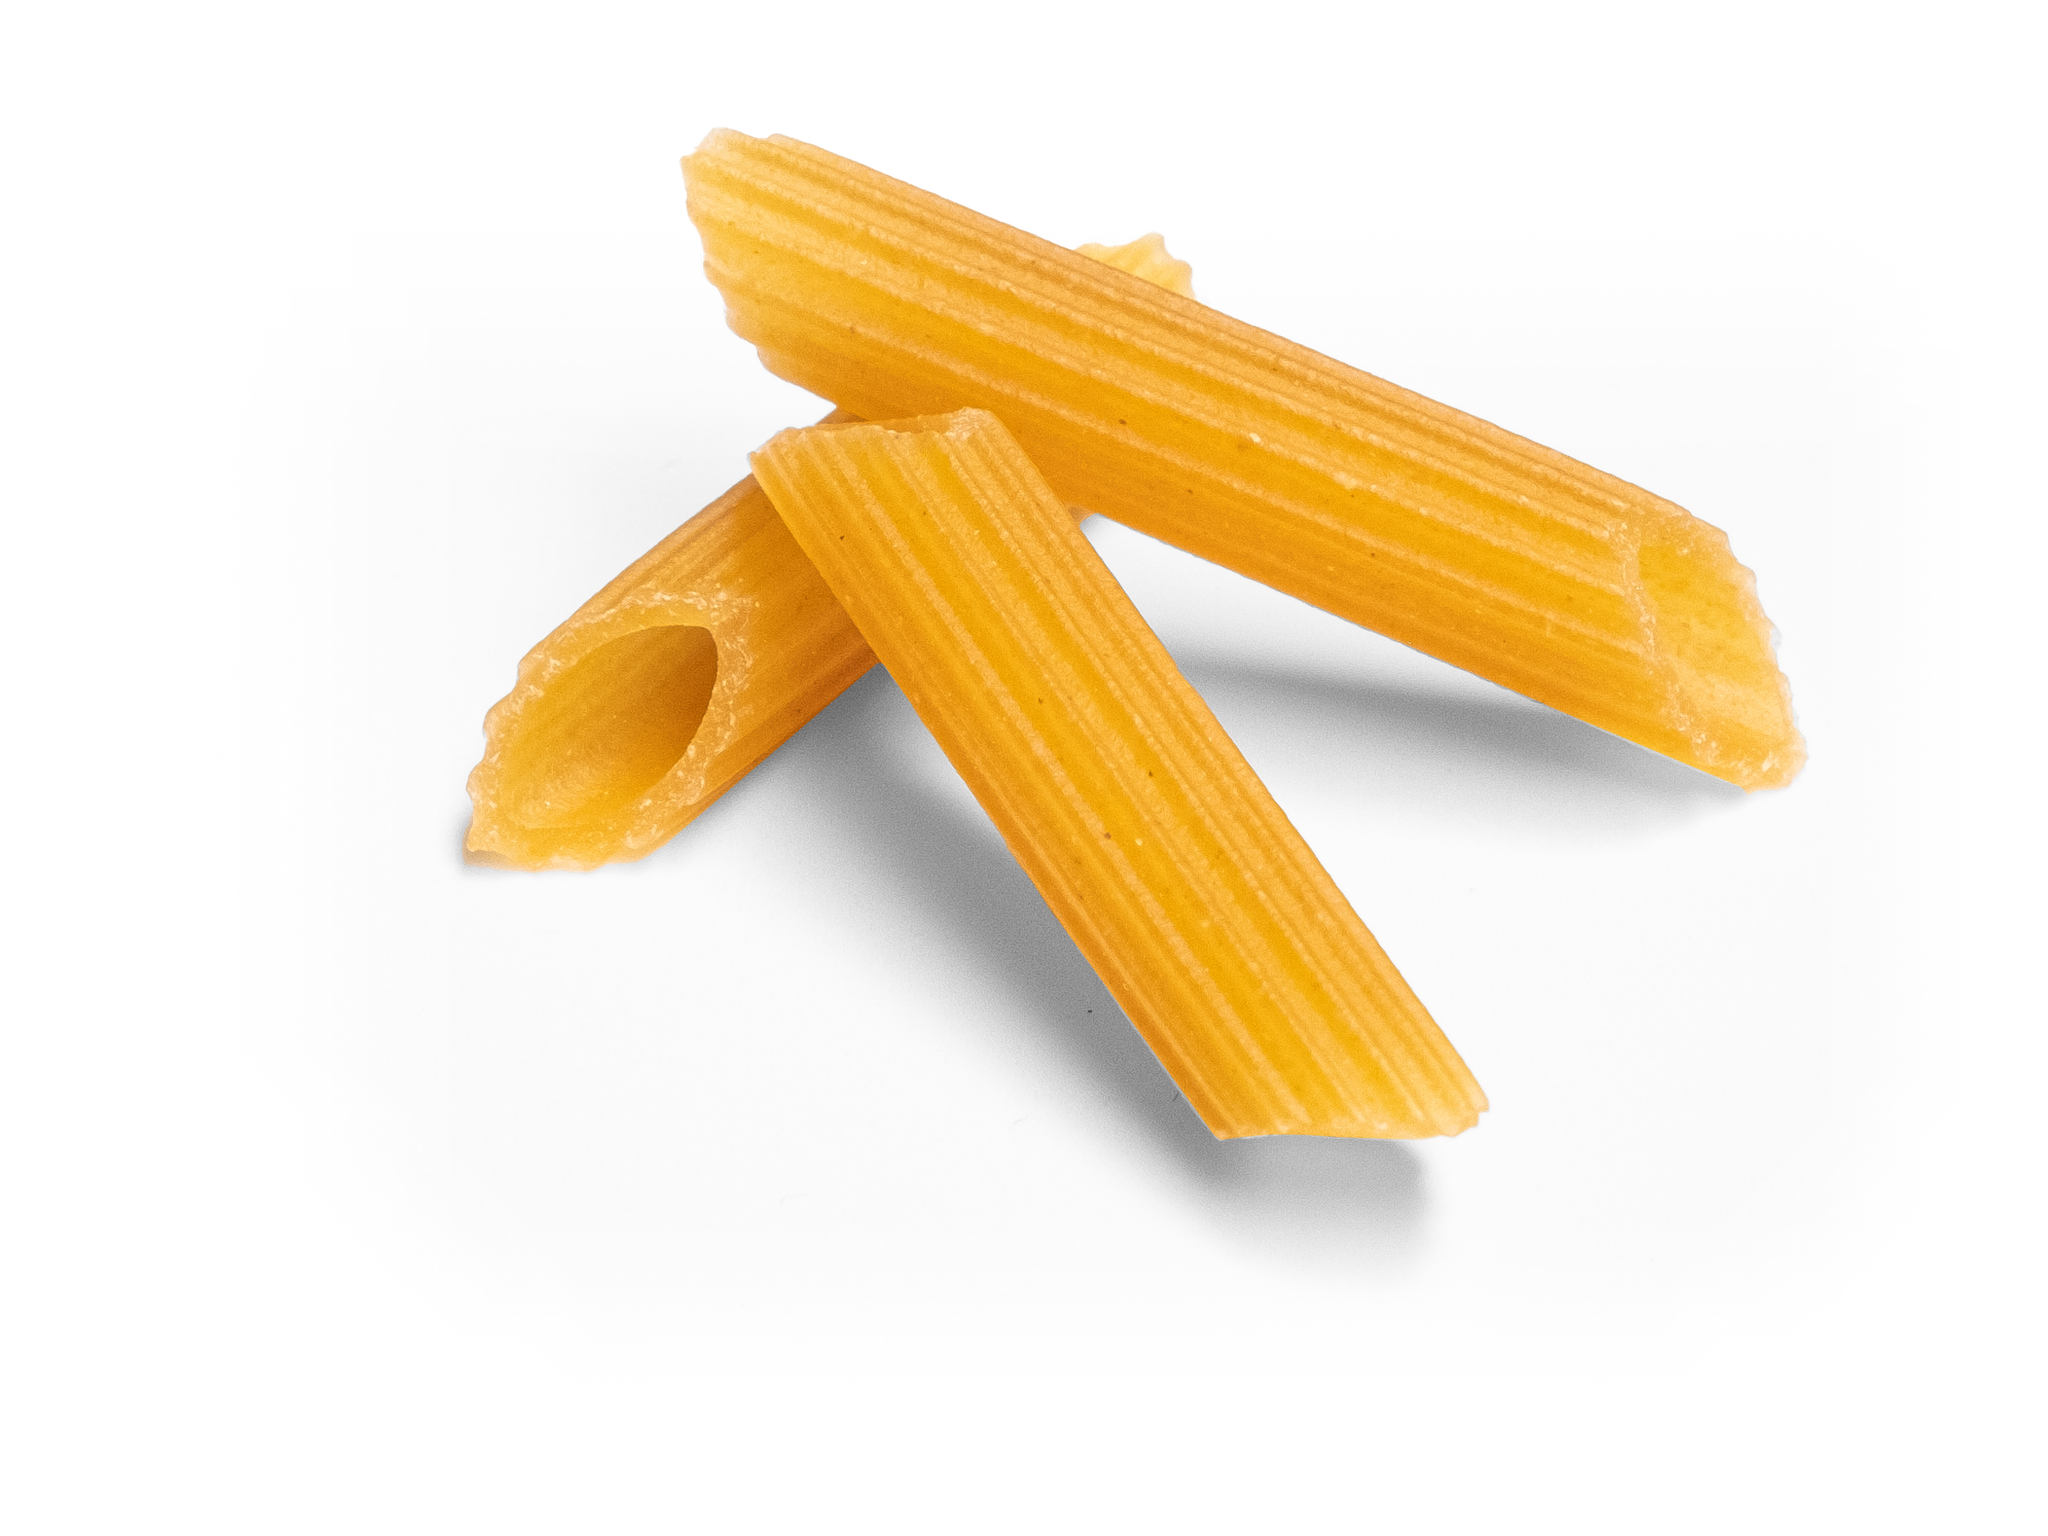 Protein Penne